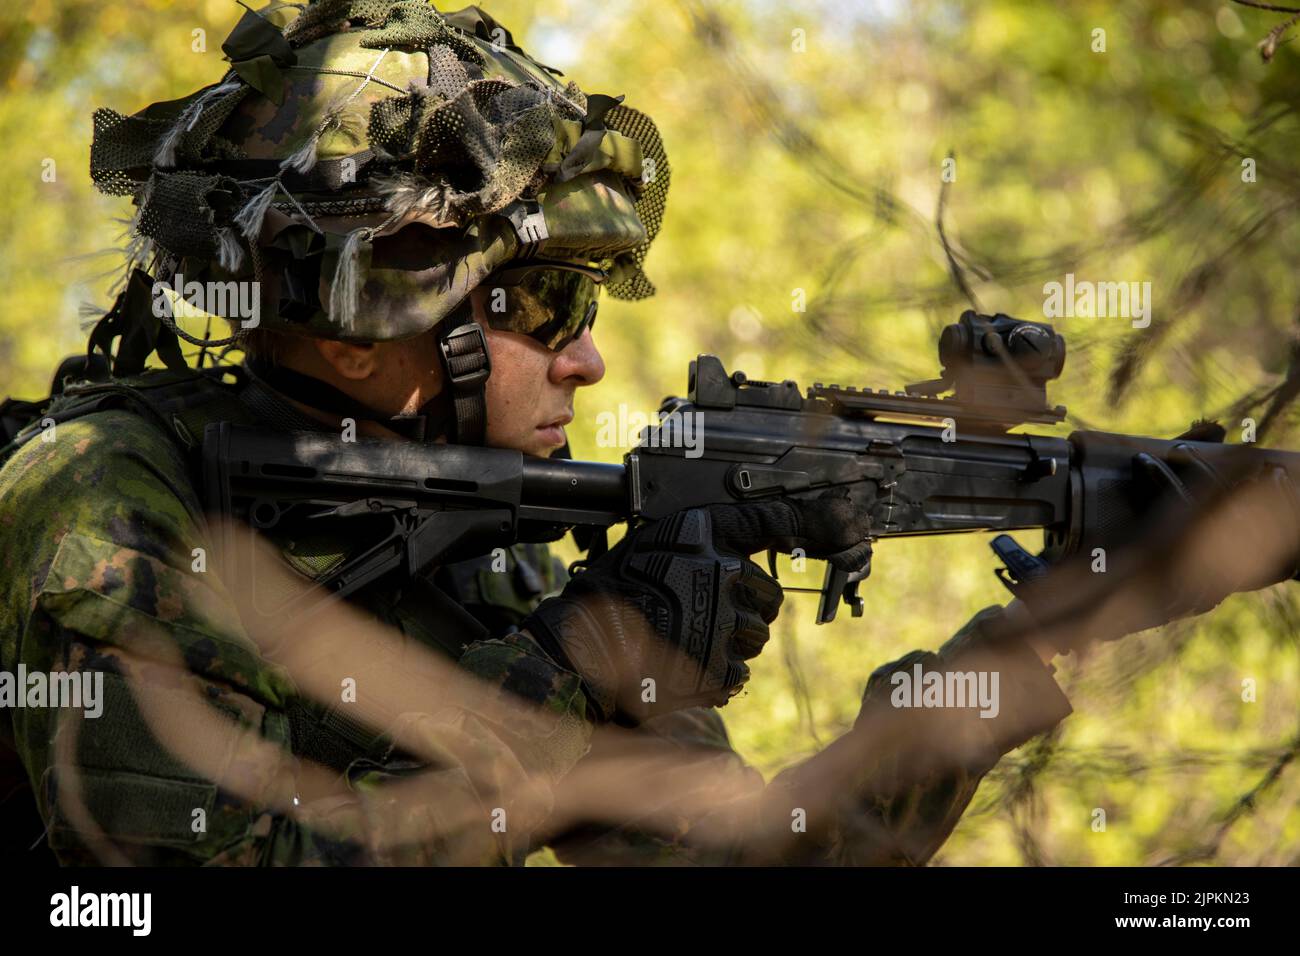 August 11, 2022 - Ahvenanmaan Maakunta (fi), Finland - A soldier with the Finnish Navy High Readiness Unit patrols with U.S. Marines, assigned to the 22nd Marine Expeditionary Unit (MEU), during bilateral training on Russaro Island, Finland, August. 11, 2022. During the training, U.S. Marines and Finnish soldiers integrated to increase interoperability between their forces. The Kearsarge Amphibious Ready Group and embarked 22nd MEU, under the command and control of Task Force 61/2, is on a scheduled deployment in the U.S. Naval Forces Europe area of operations, employed by U.S. Sixth Fleet to Stock Photo